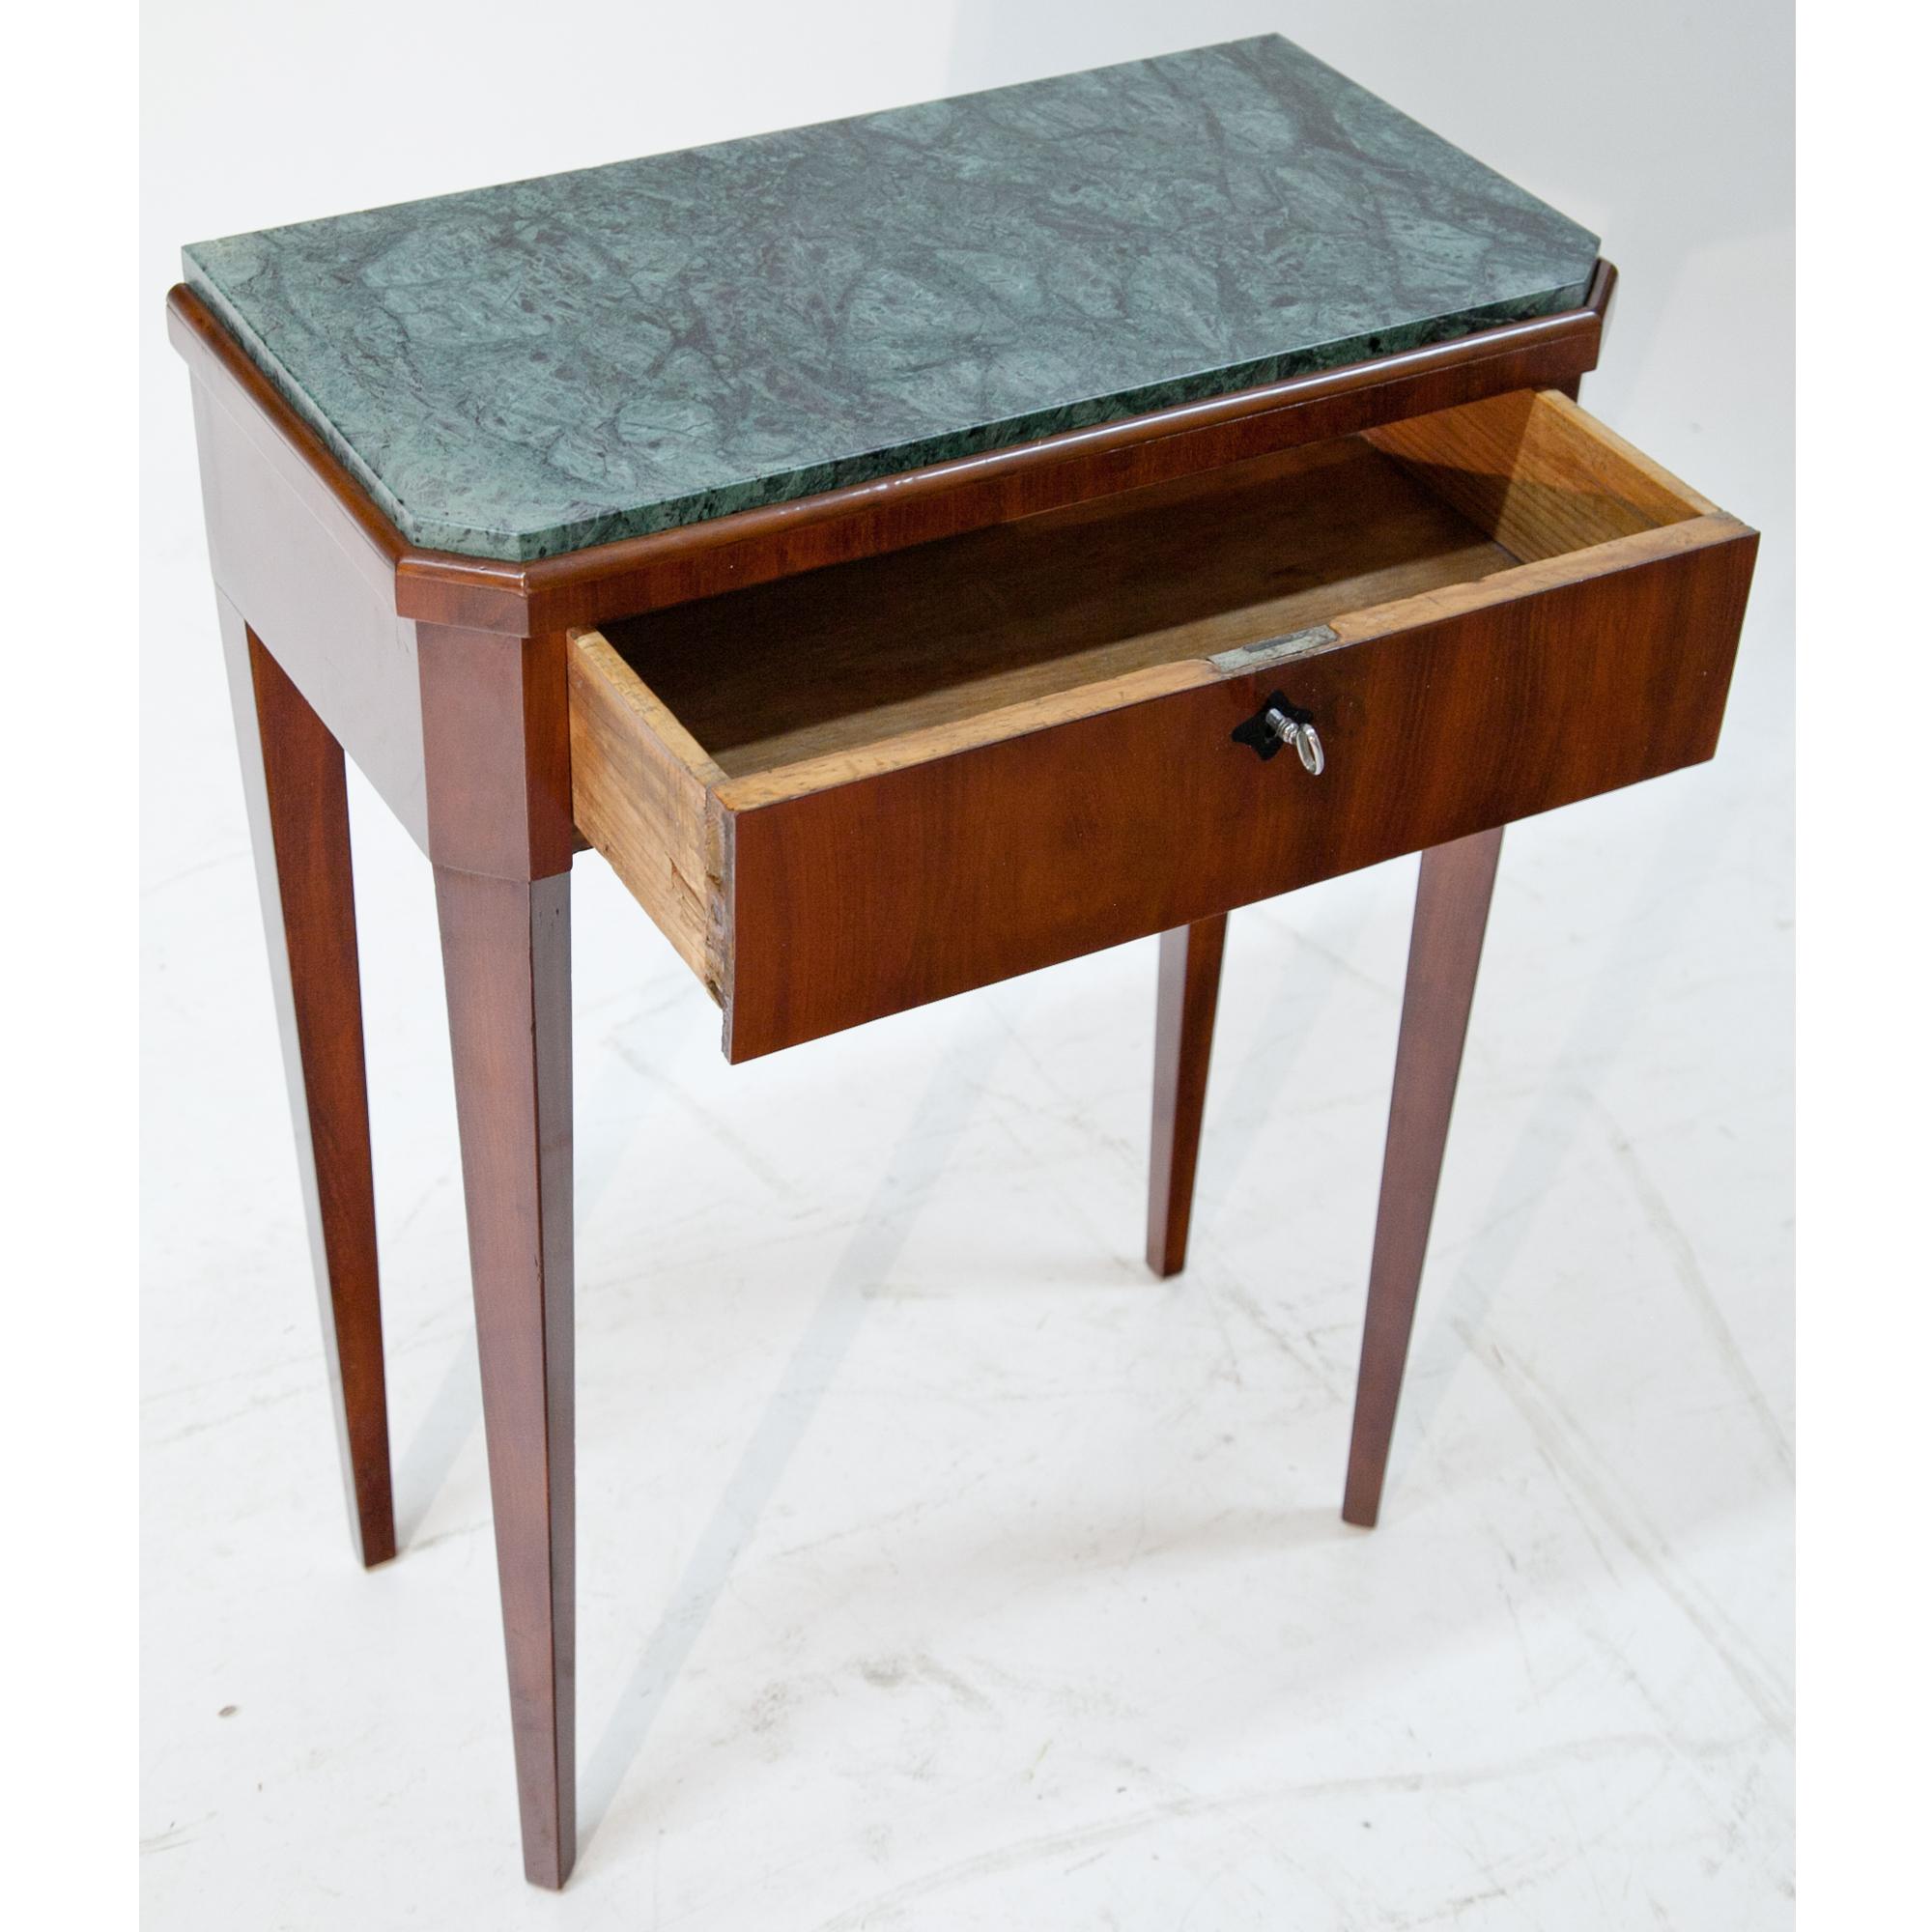 Small tall-legged console table with one drawer and ebonized escutcheon. The green stone top was added later.